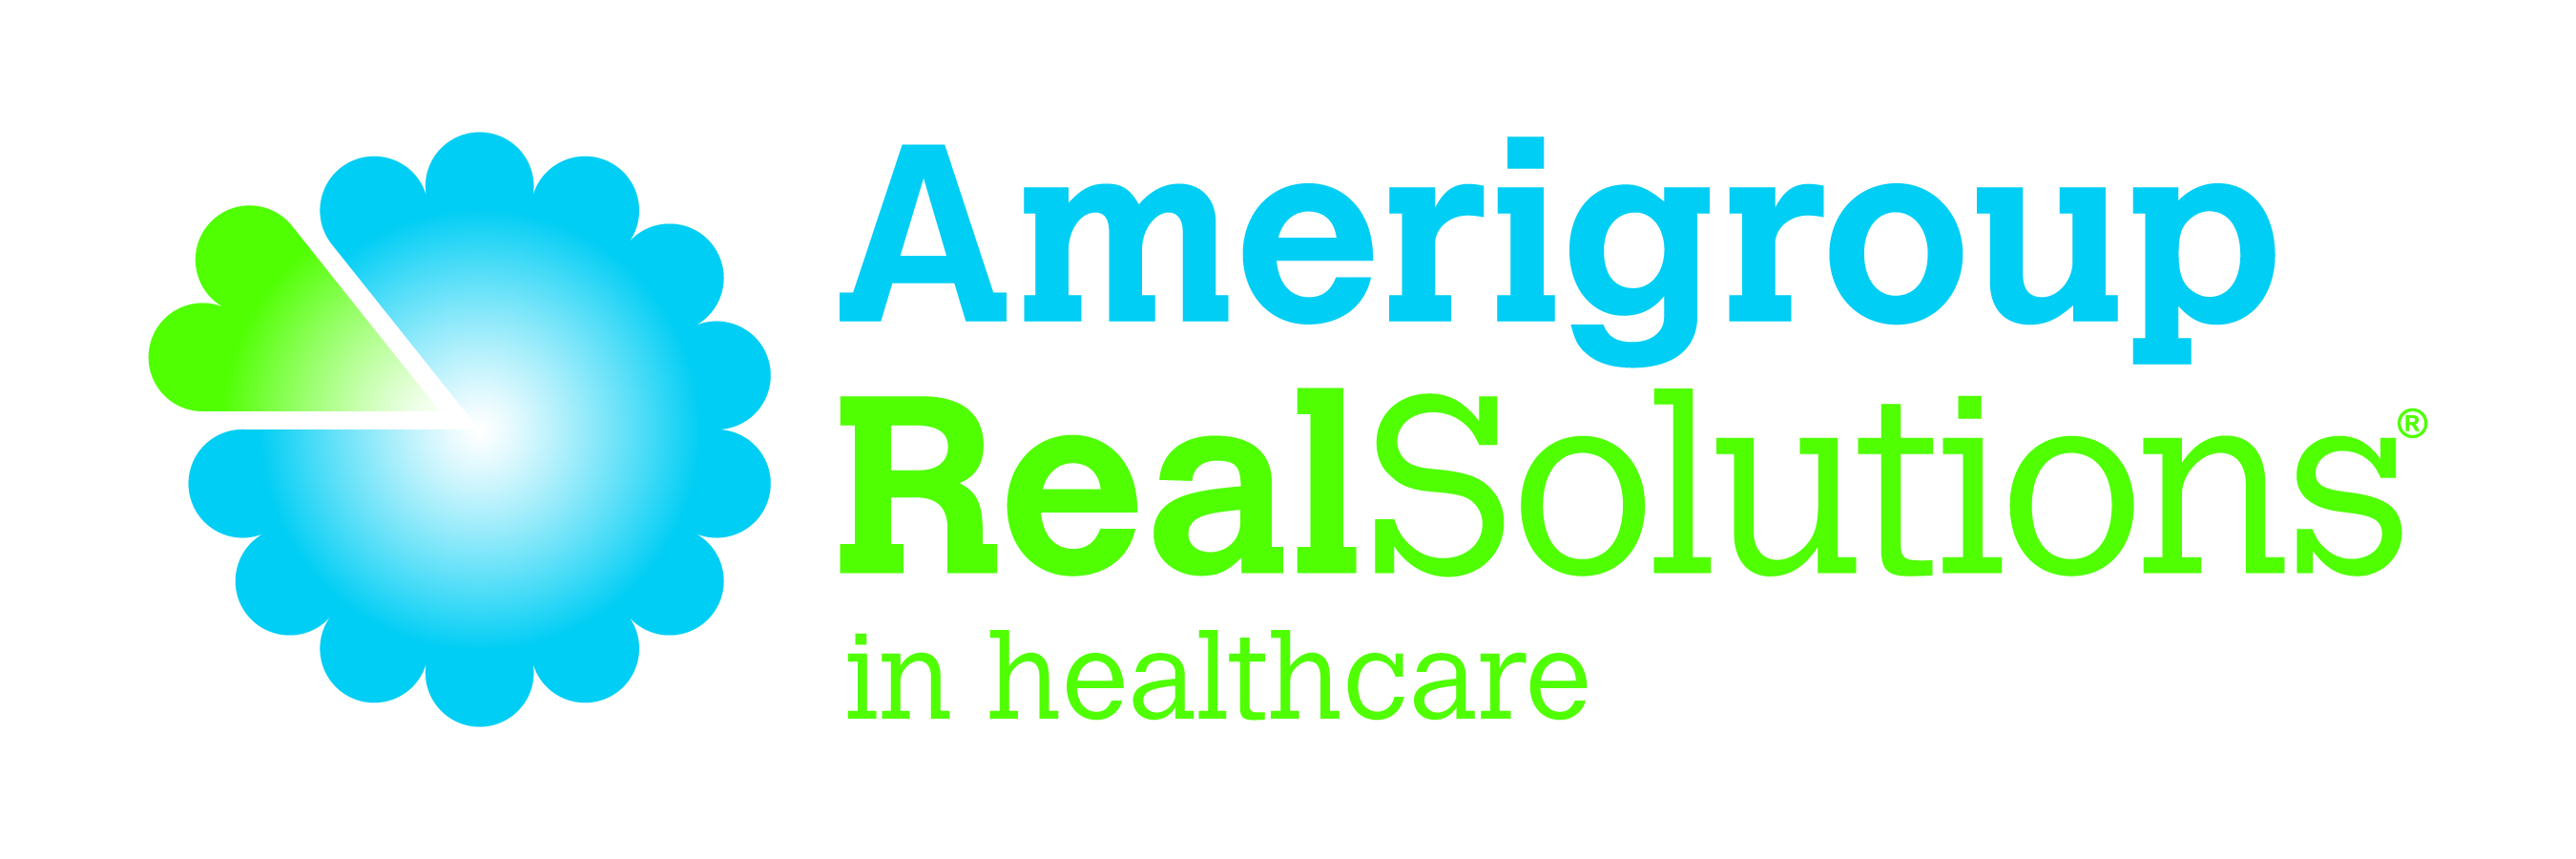 Amerigroup RealSolutions in healthcare